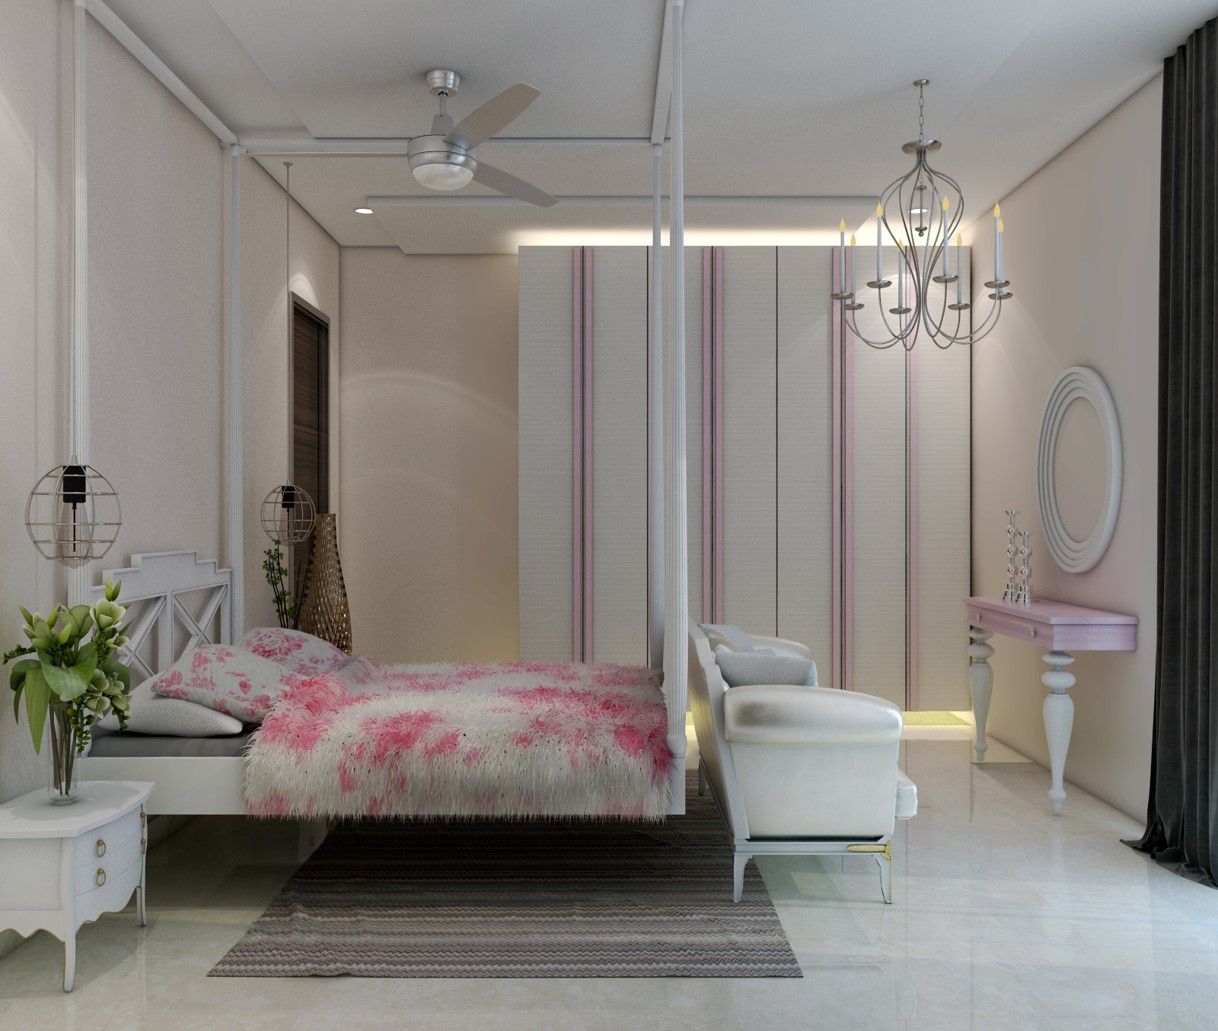 Girls bedroom in white and pink Rhythm And Emphasis Design Studio